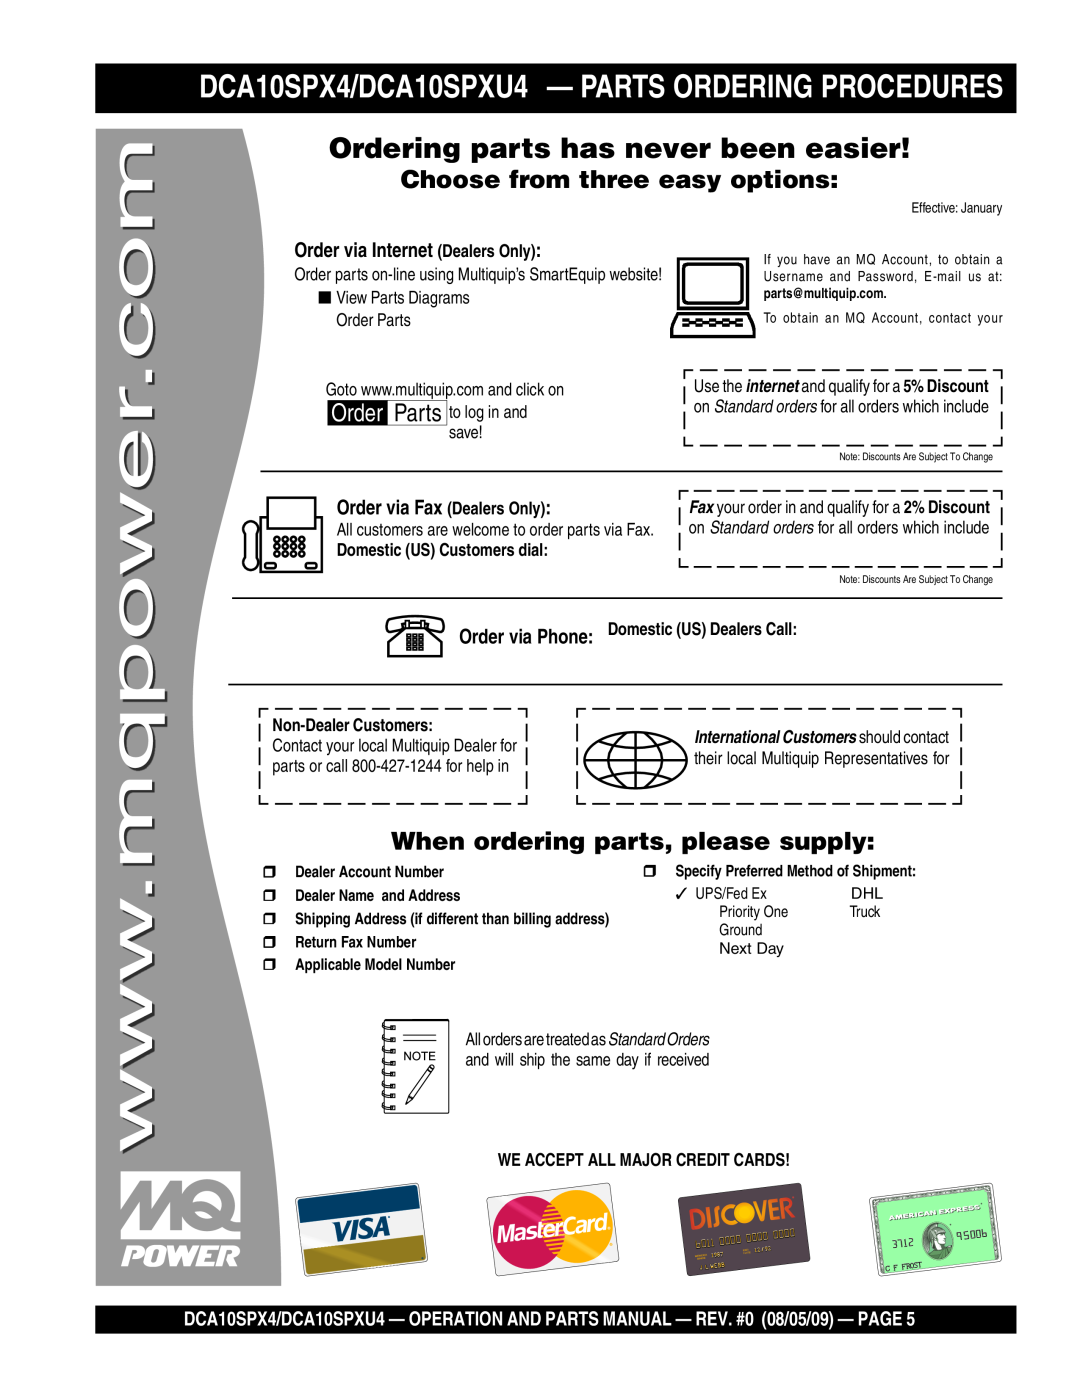 Multiquip DCA10SPX4/DCA10SPXU4 - PARTS ORDERING PROCEDURES, Choose from three easy options, Order via Fax Dealers Only 